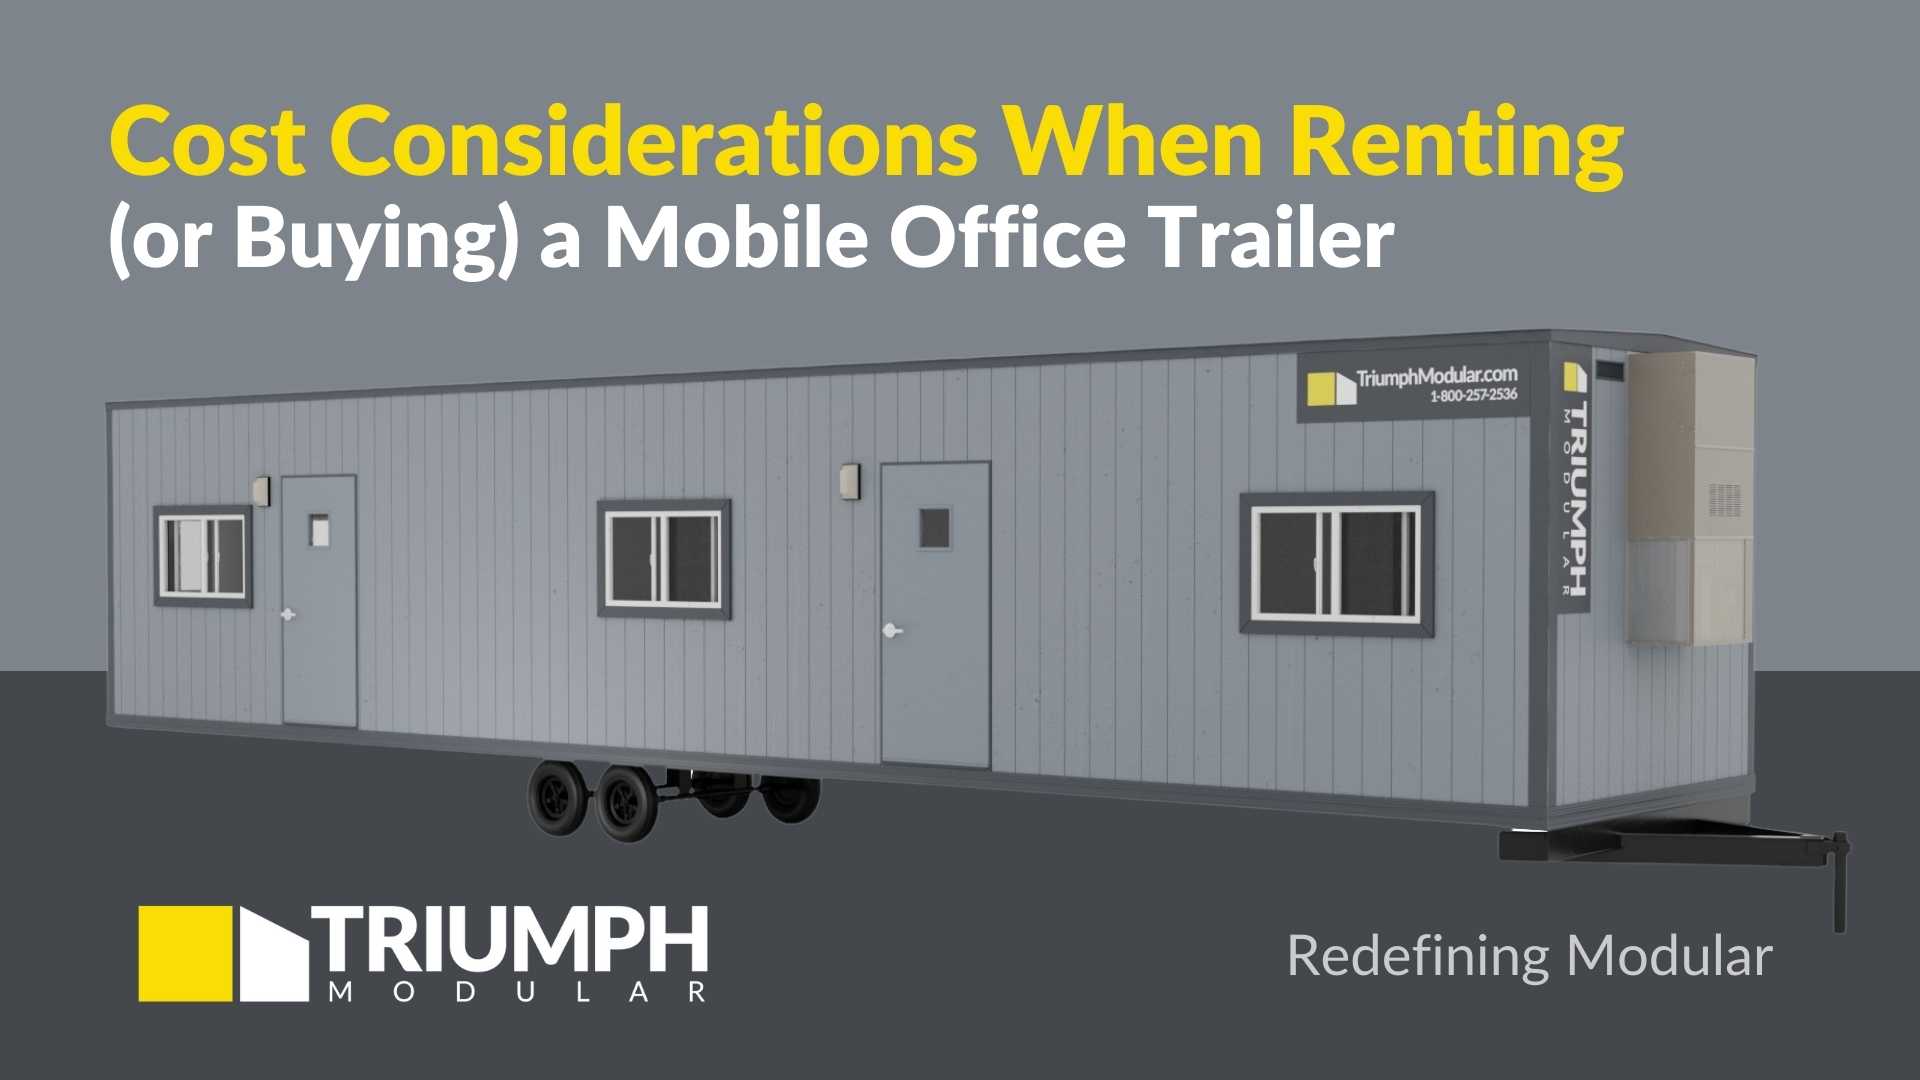 Featured image for Cost Considerations for buying or renting a mobile office trailer article